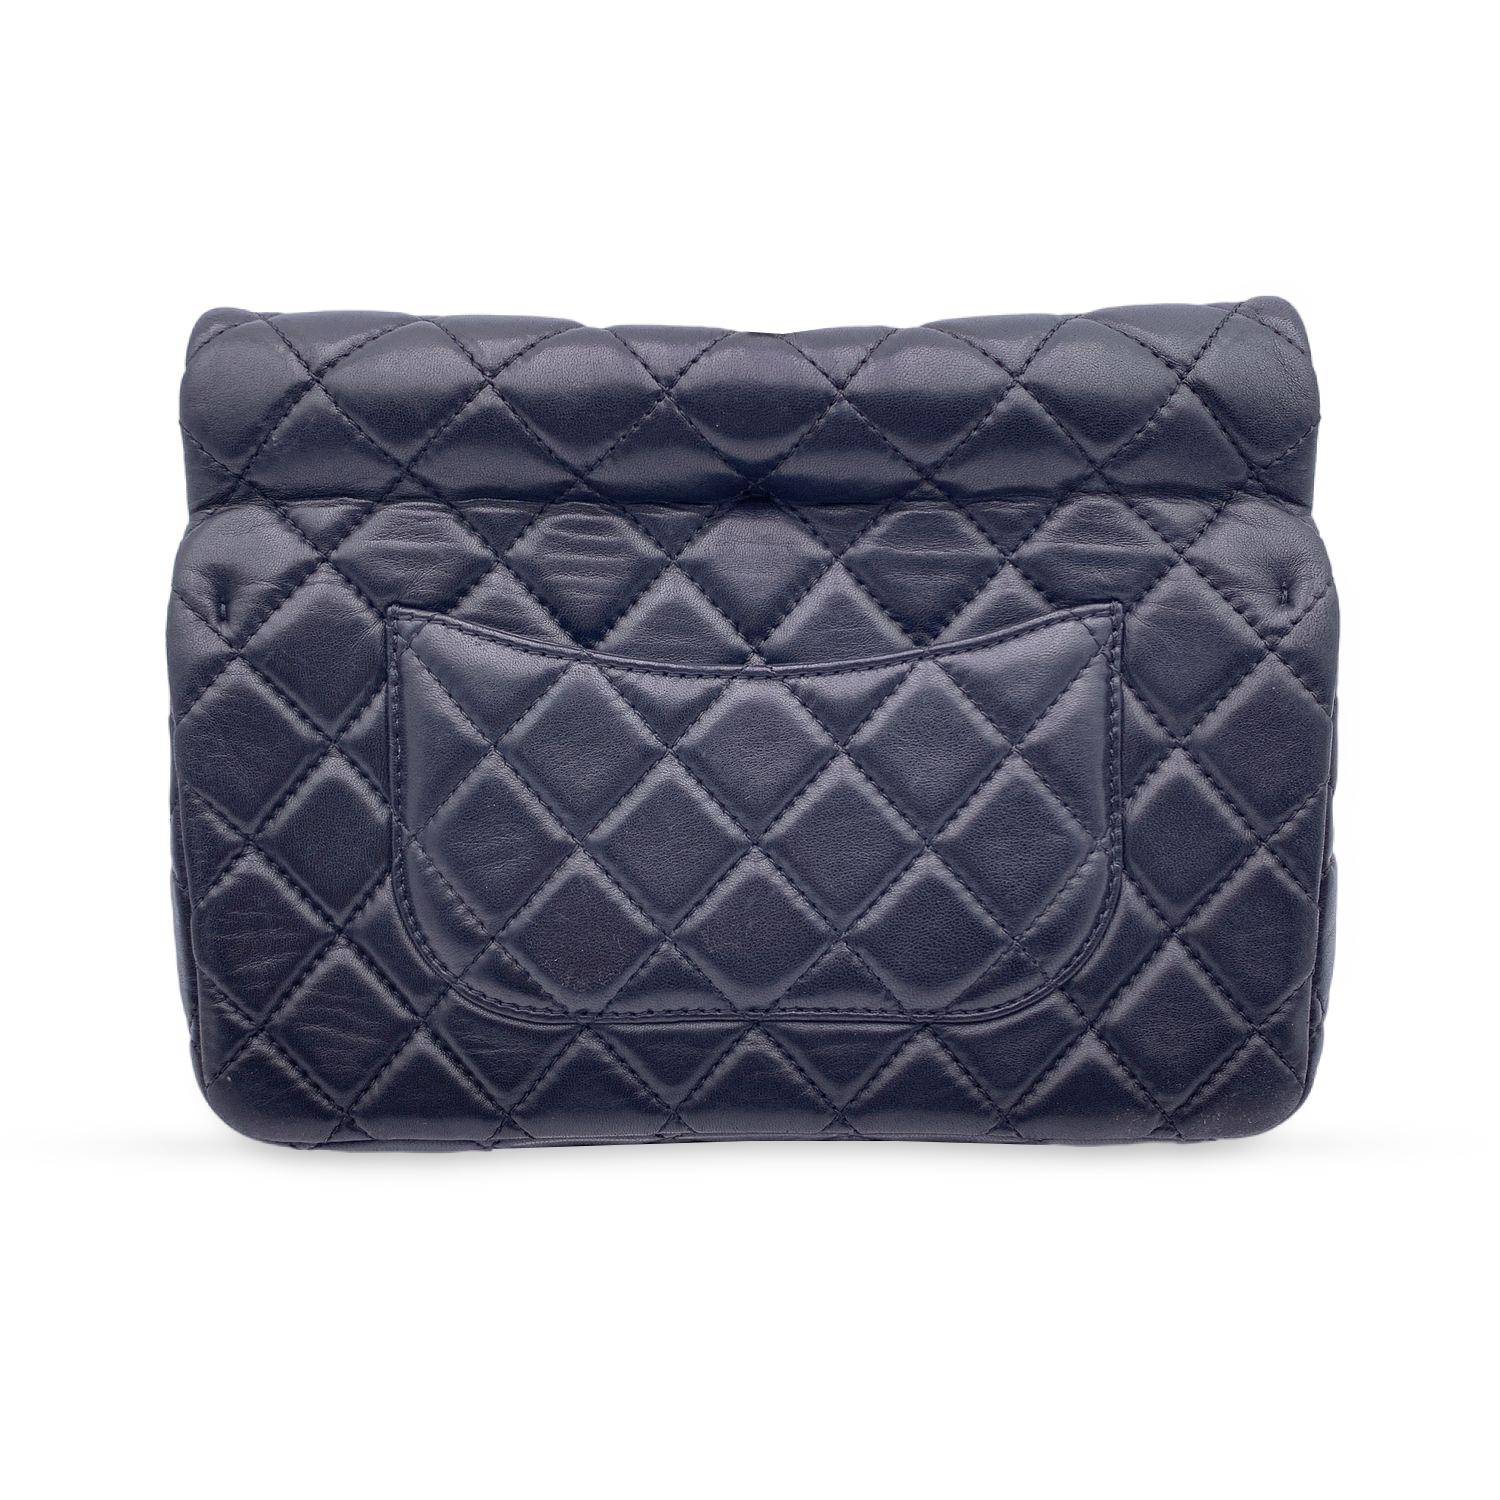 Chanel Black Quilted Leather Reissue Roll 2.55 Clutch Bag Handbag In Good Condition For Sale In Rome, Rome